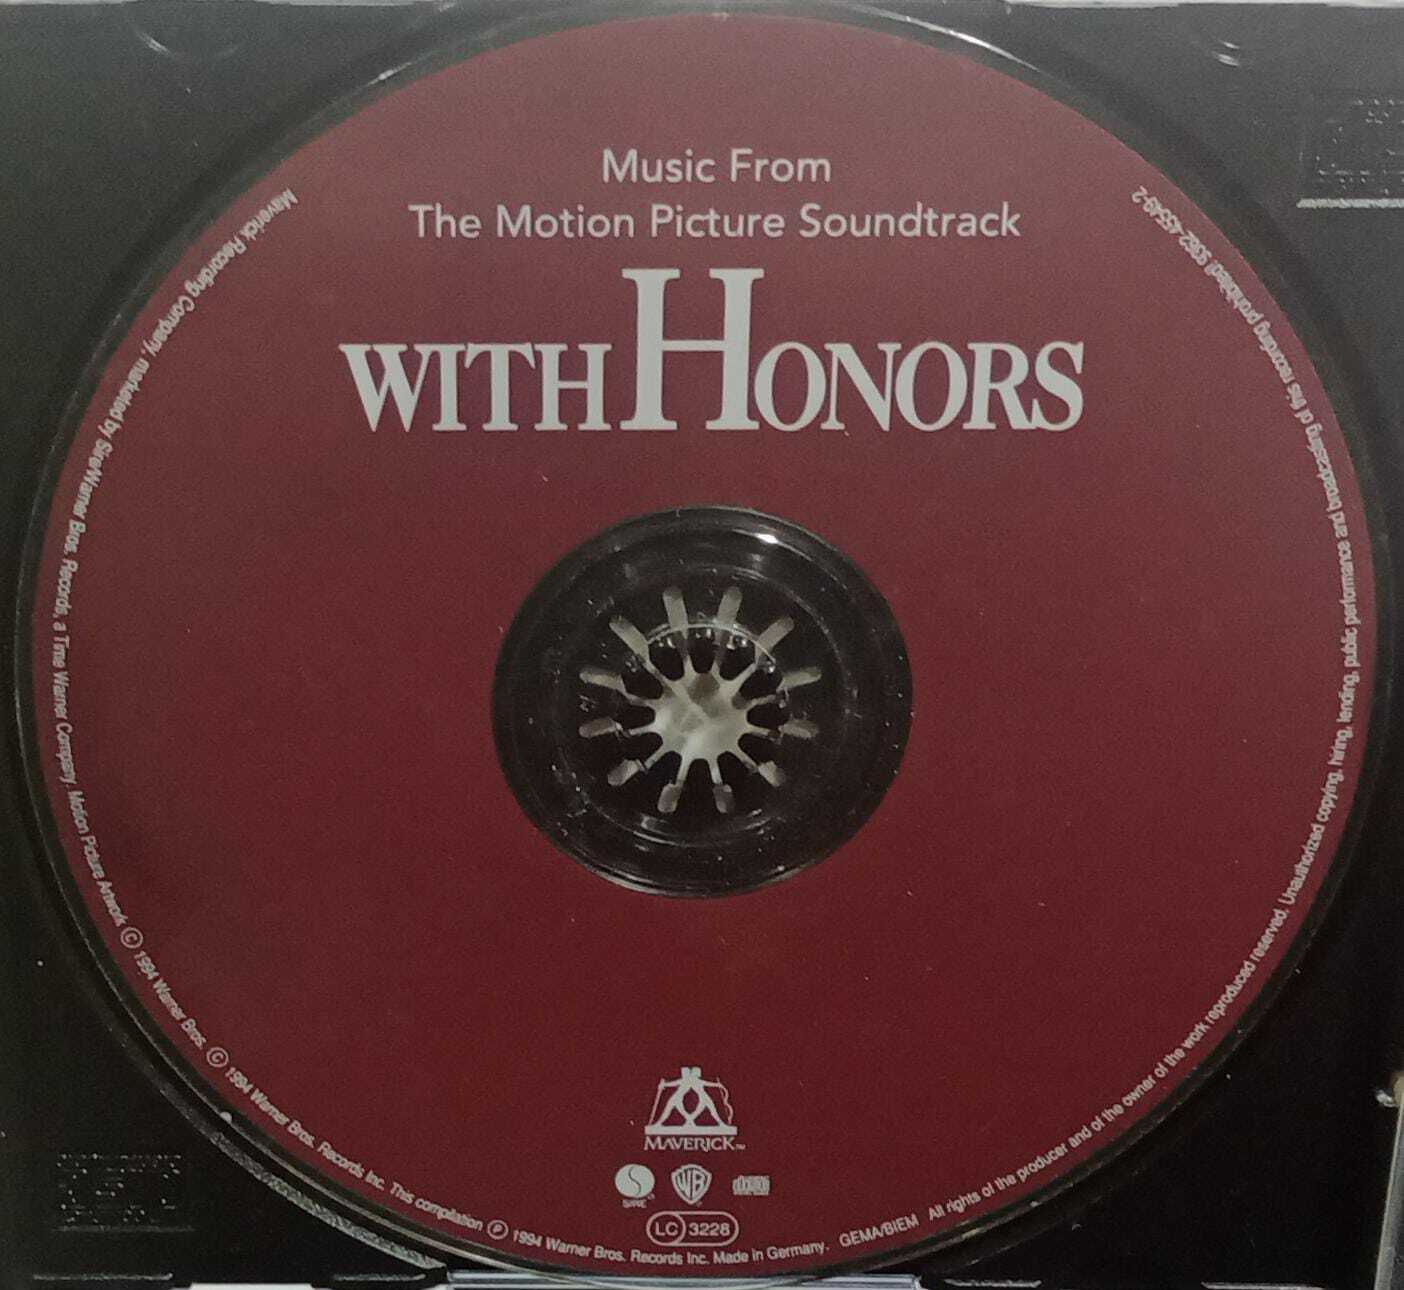 CD - With Honors - Music From The Motion Picture Soundtrack (Germany)